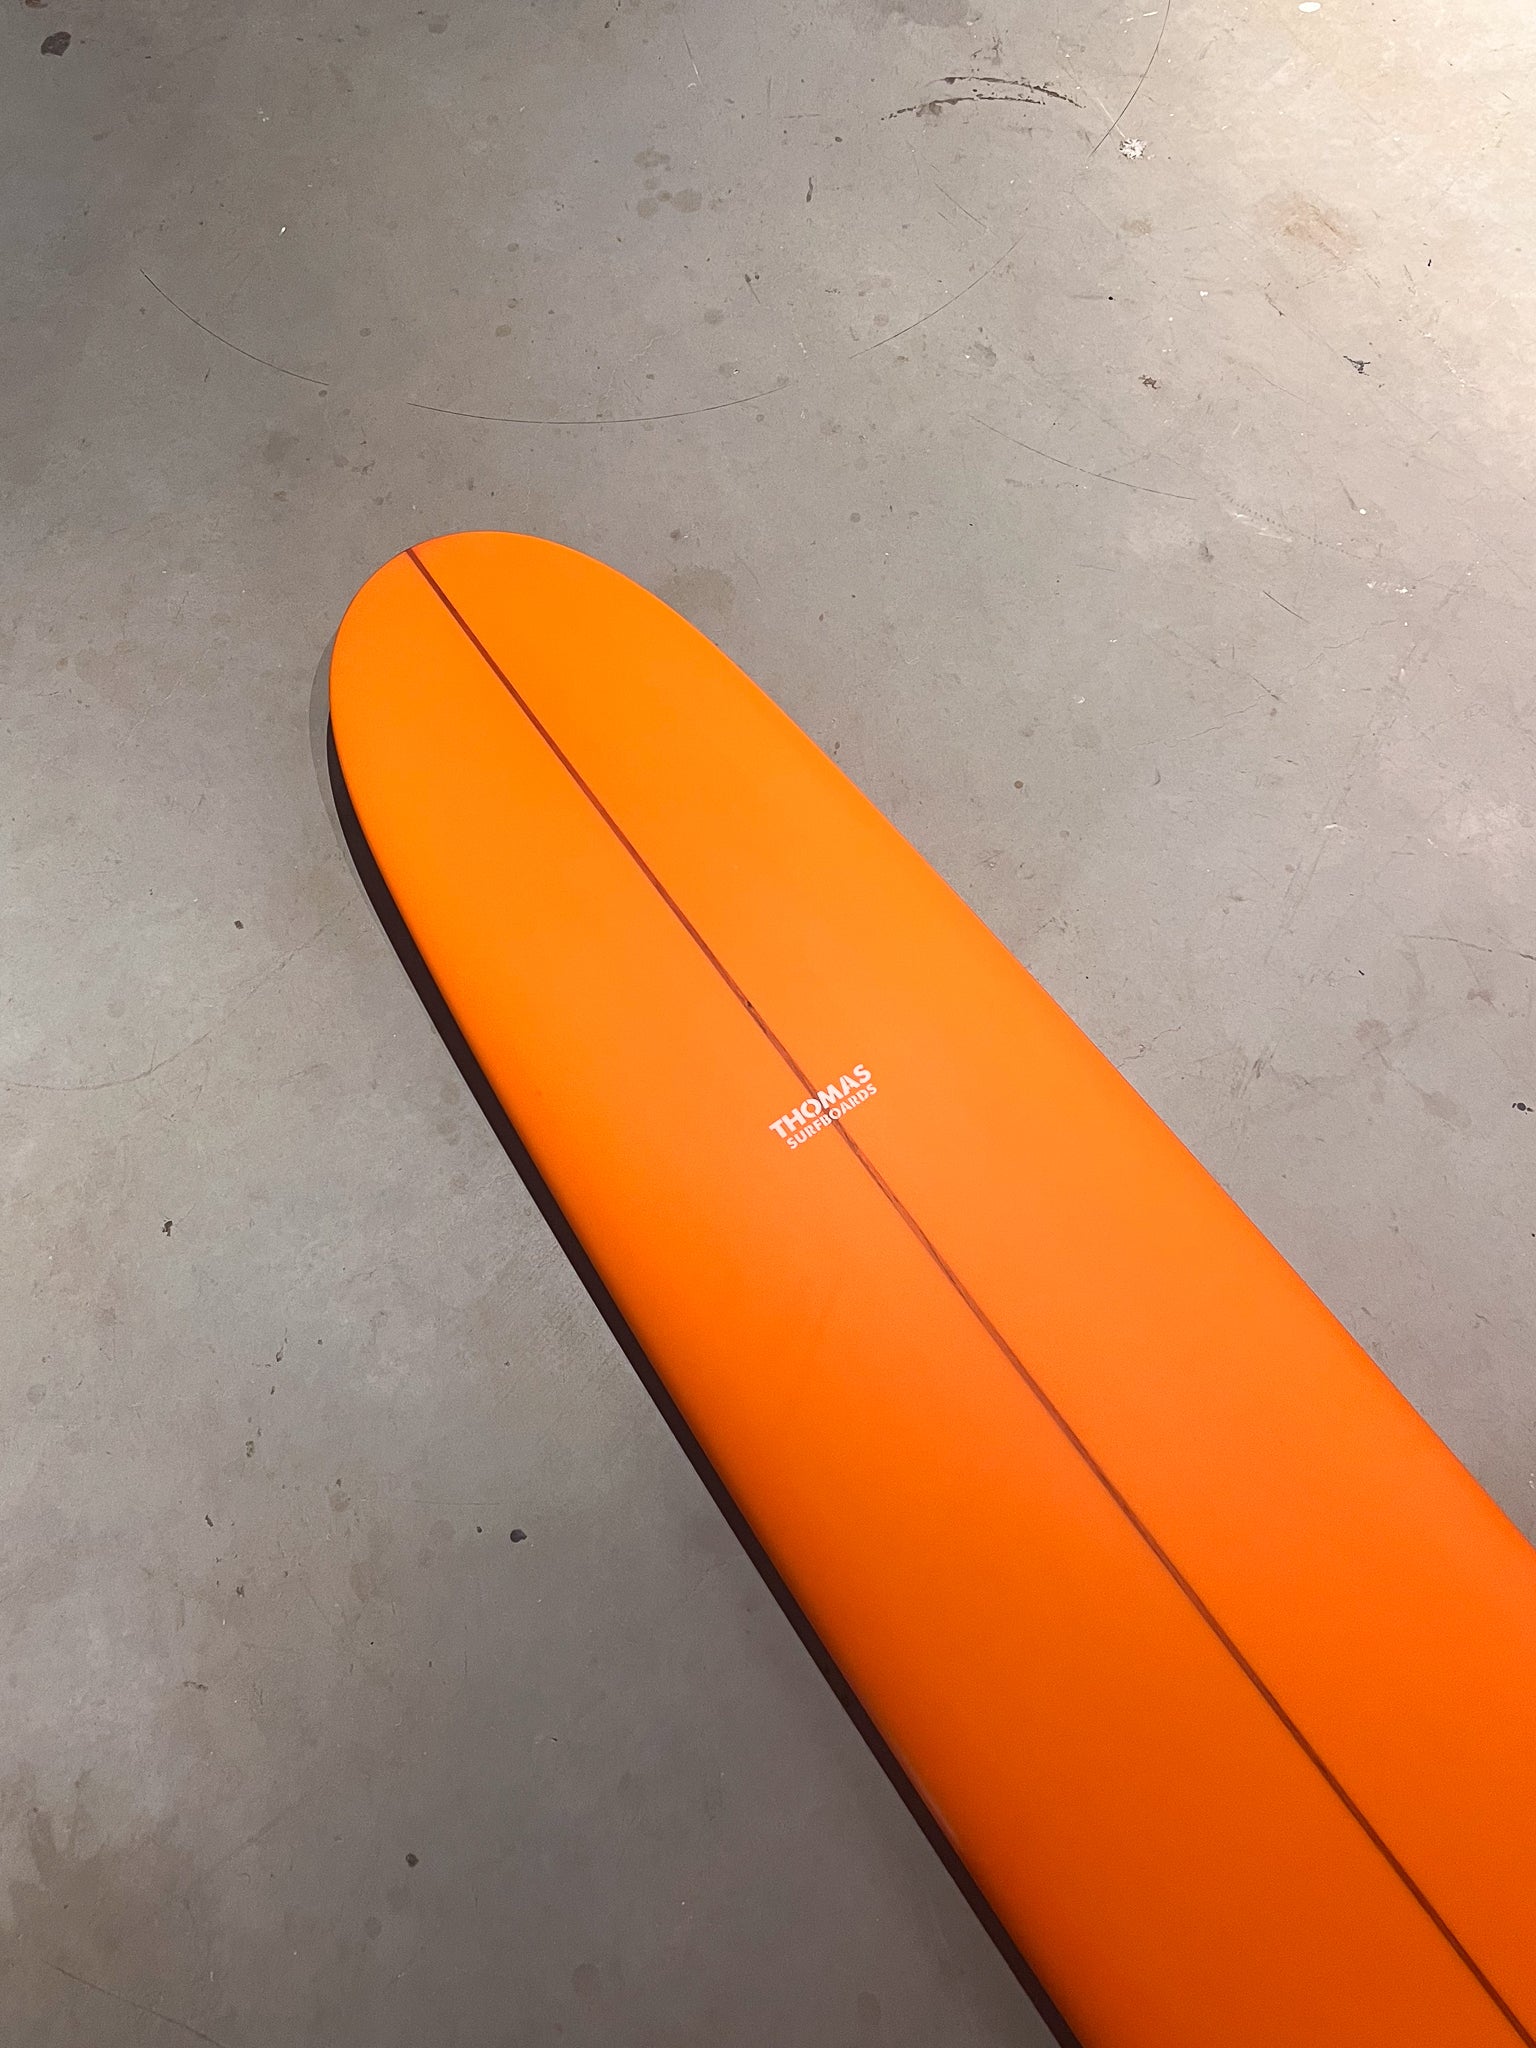 9'10" Scoop Tail #7360